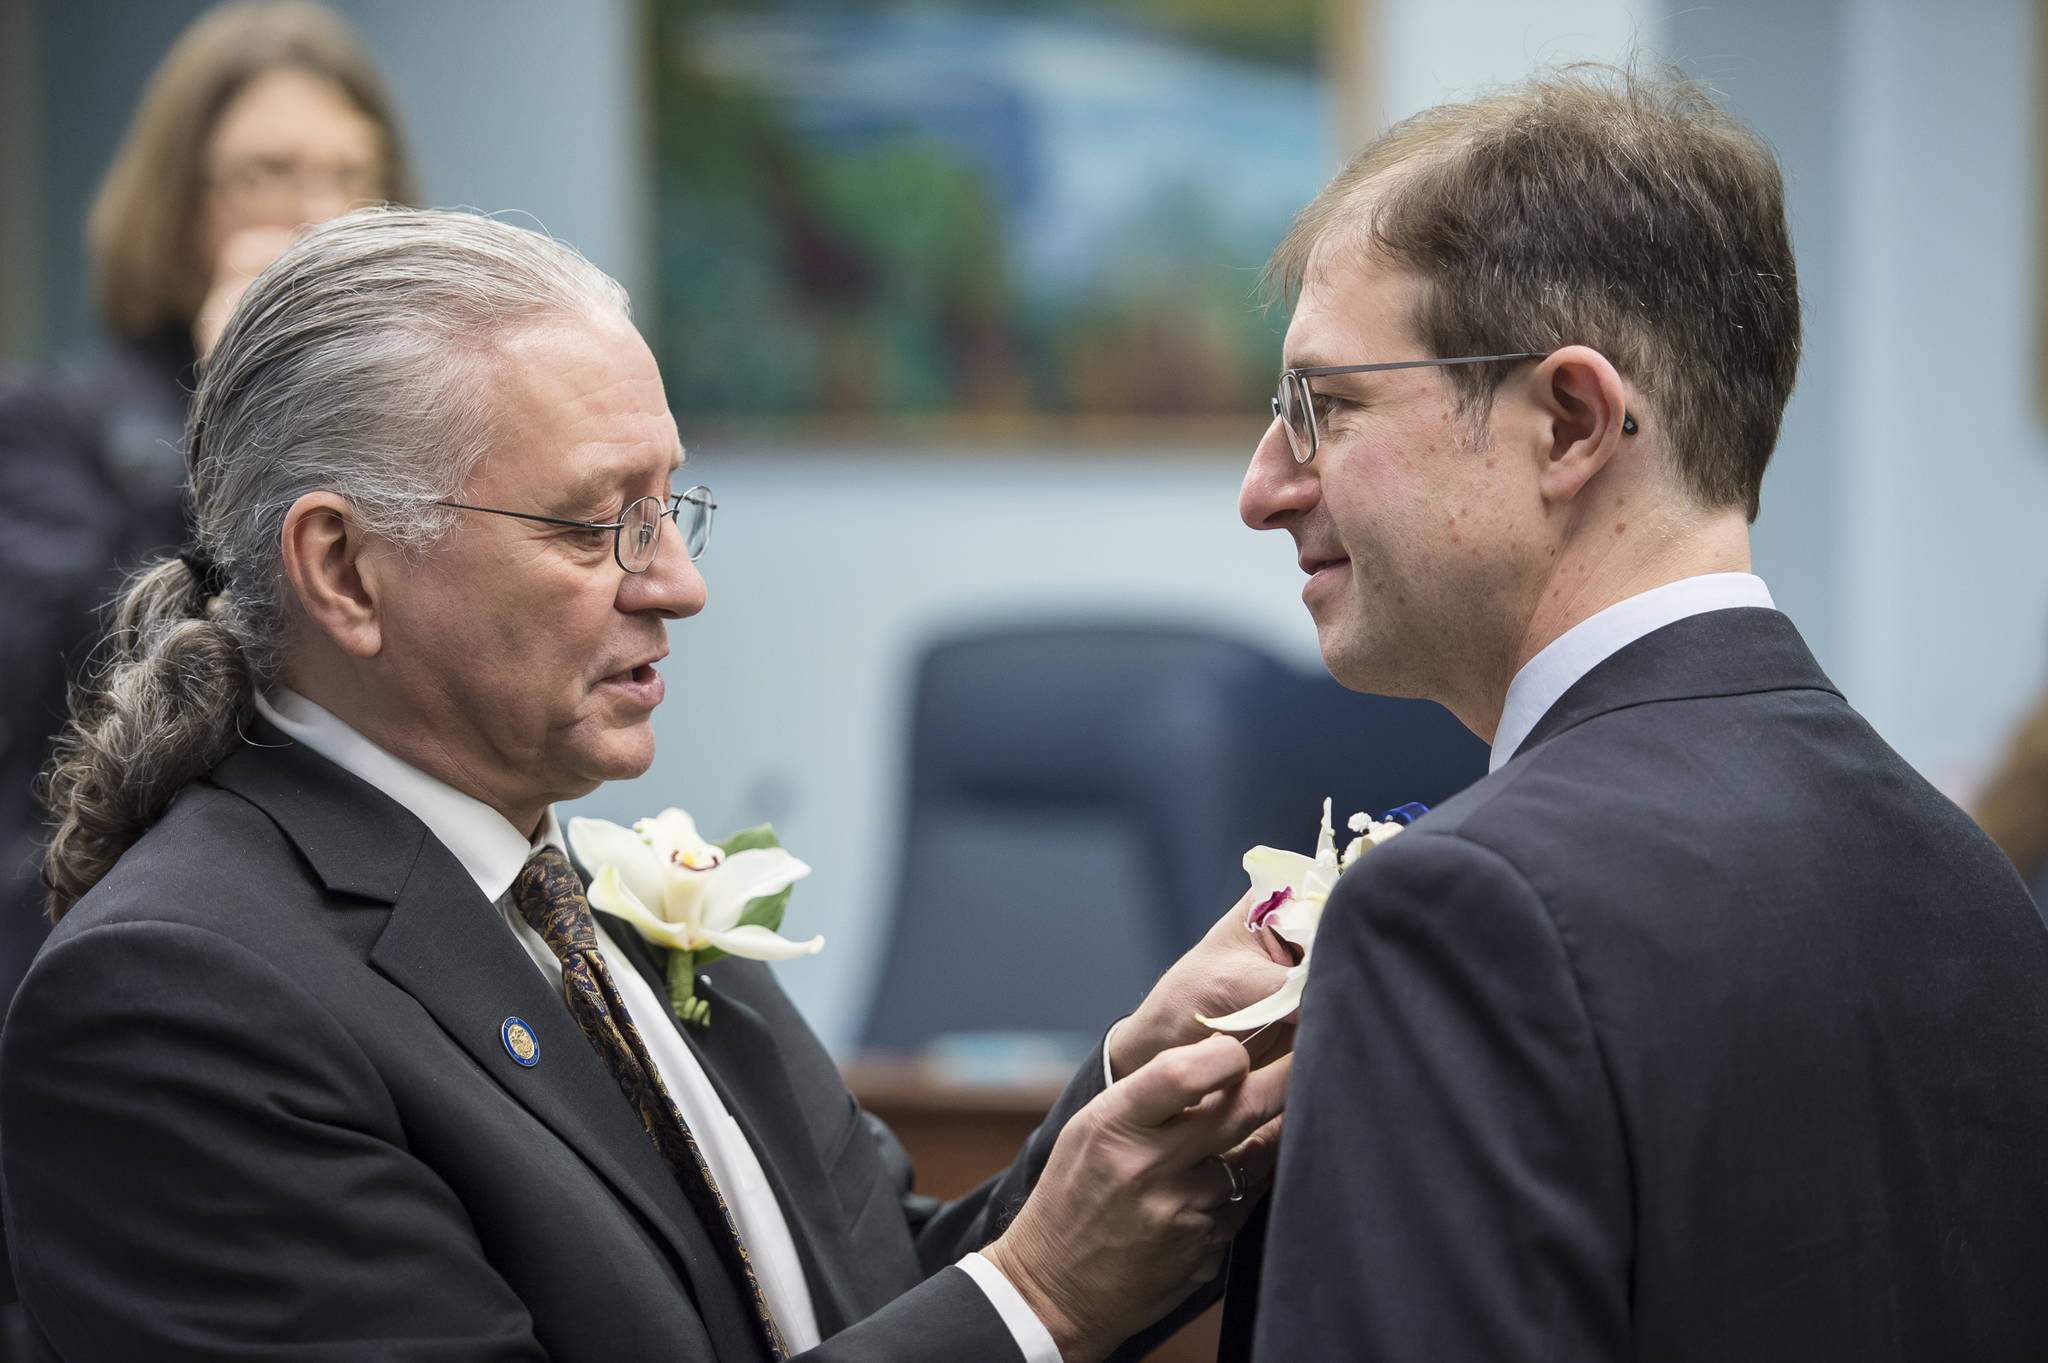 Sen. Tom Begich, D-Anchorage, left, pins a flower on incoming Sen. Jesse Kiehl, D-Juneau, on the opening day of the 31st Session of the Alaska Legislature on Tuesday, Jan. 15, 2019. (Michael Penn | Juneau Empire)